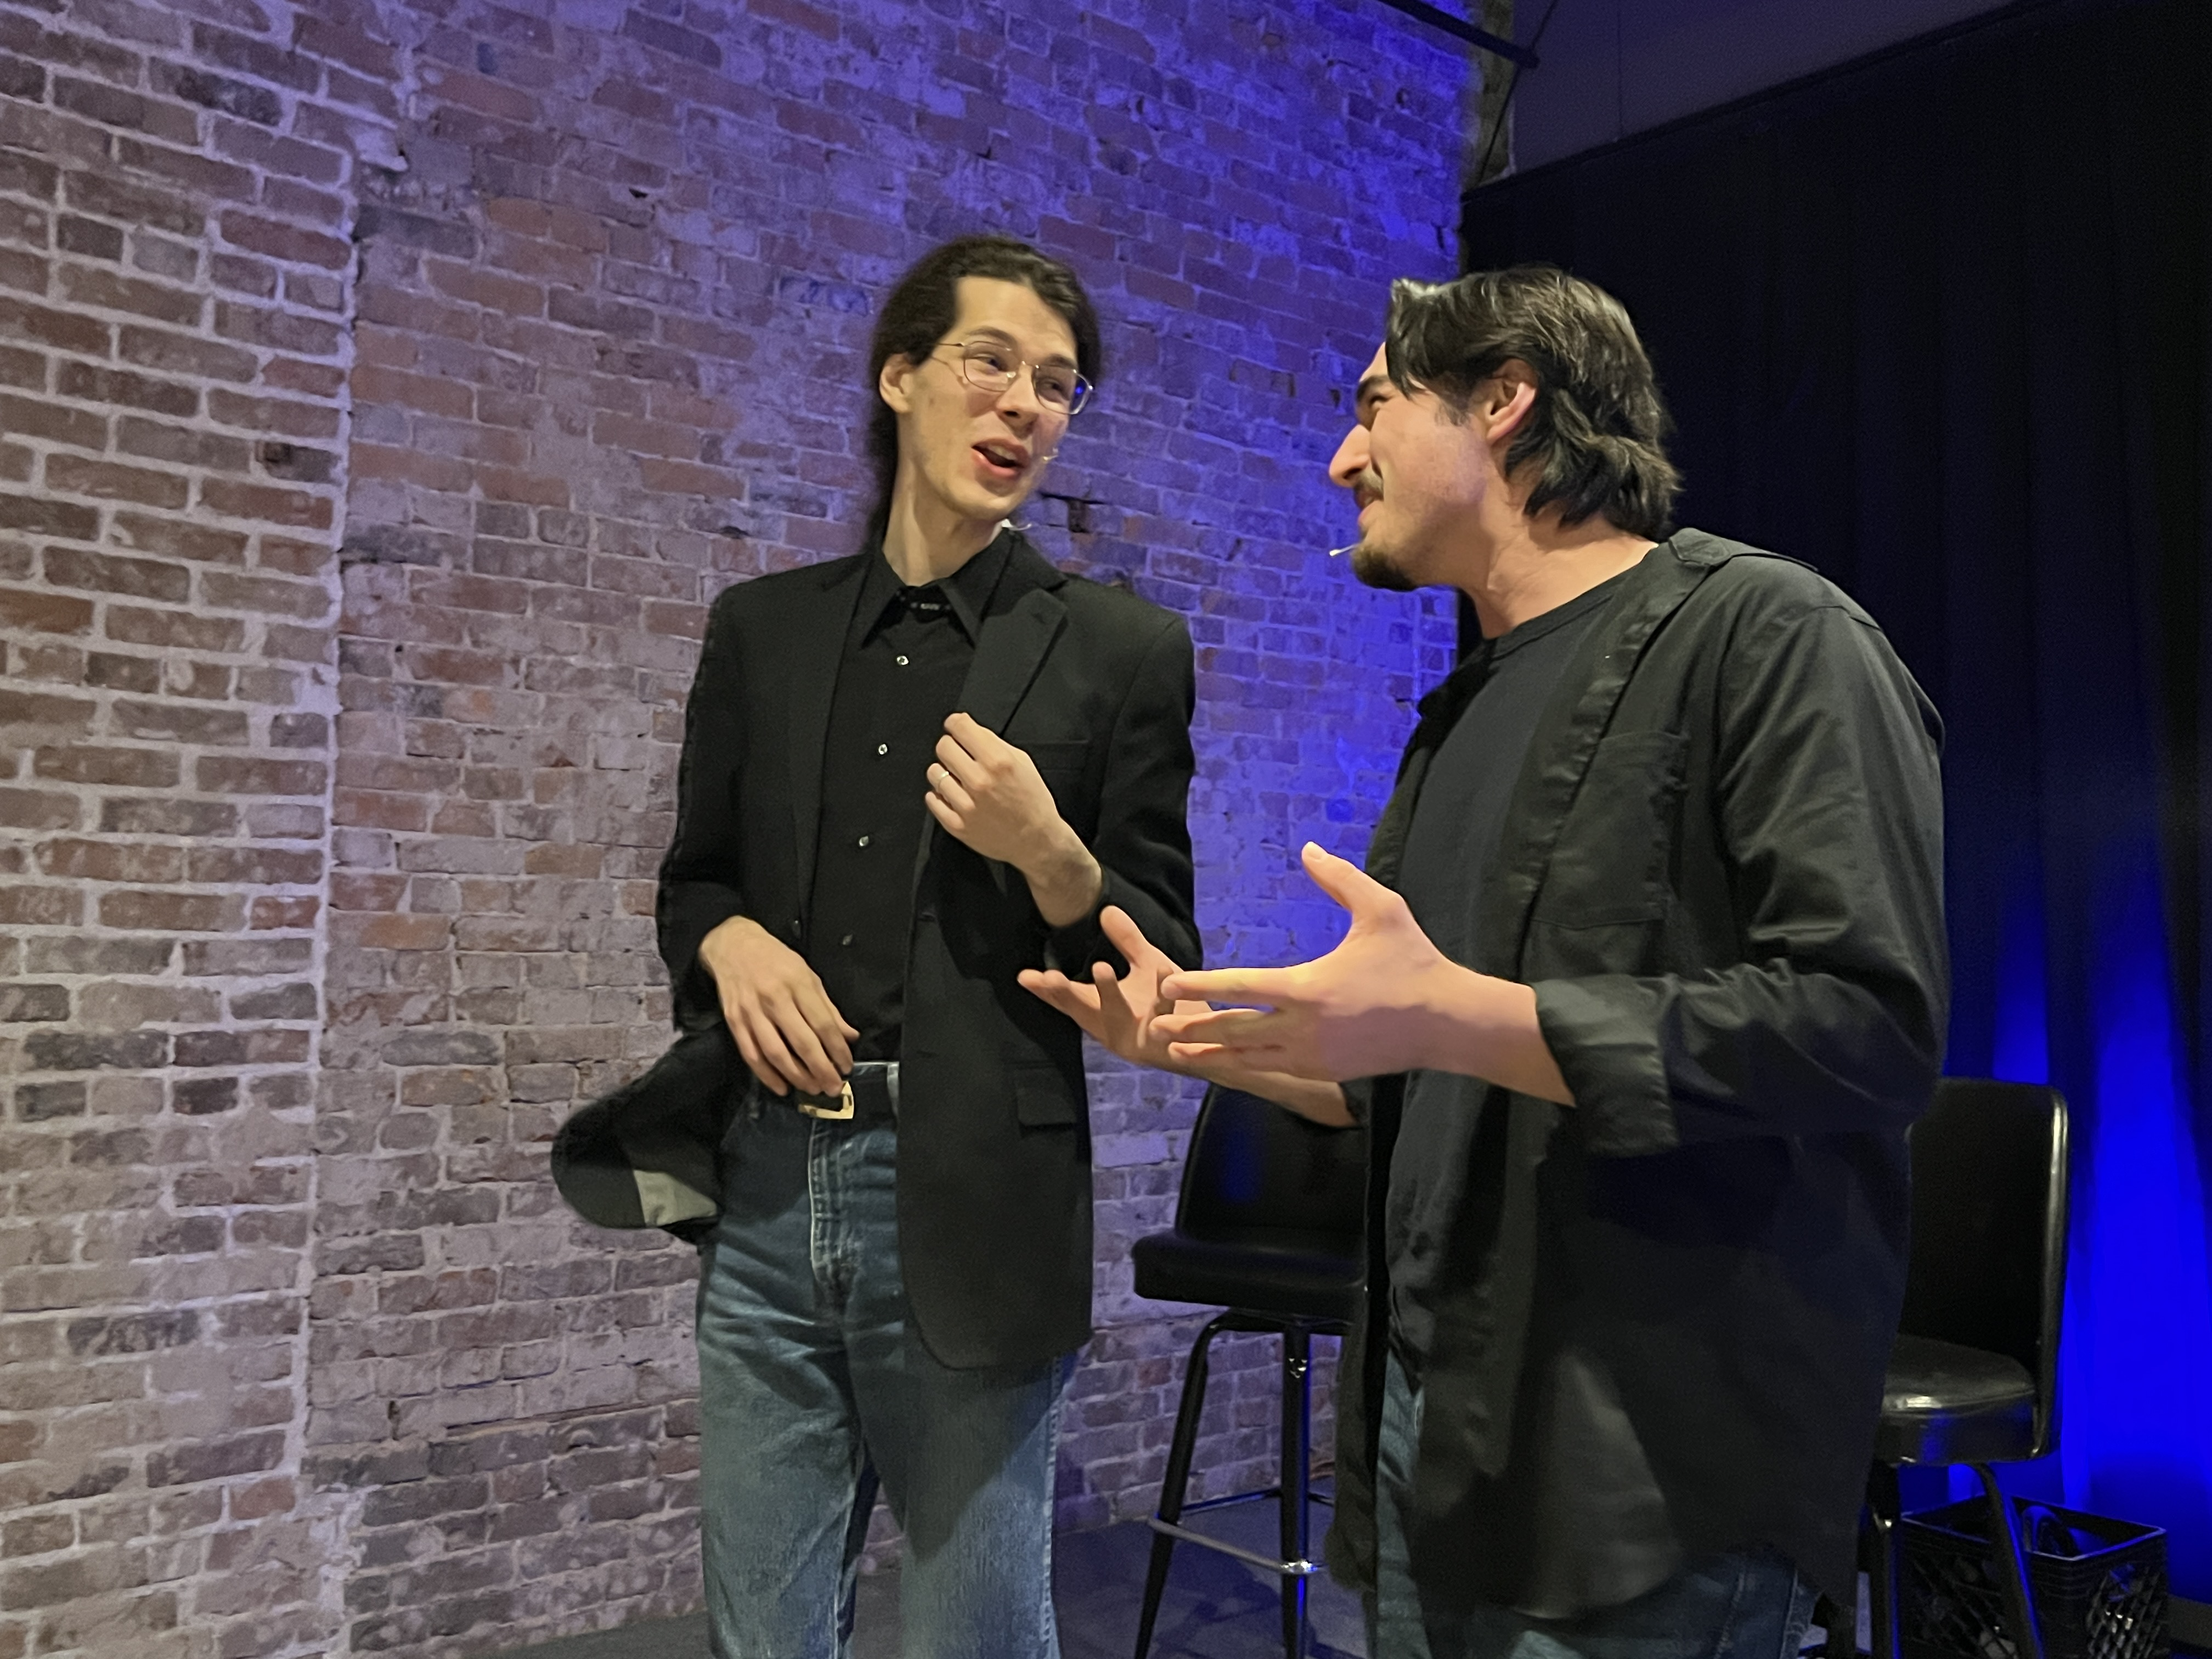 Roland Netzer, left, and Tyler Simpson rehearse a scene from High Tide Theatrical's production of "Tick, Tick... Boom!" They play best friends Michael and Jon. (Photo by Jeff Kessinger)